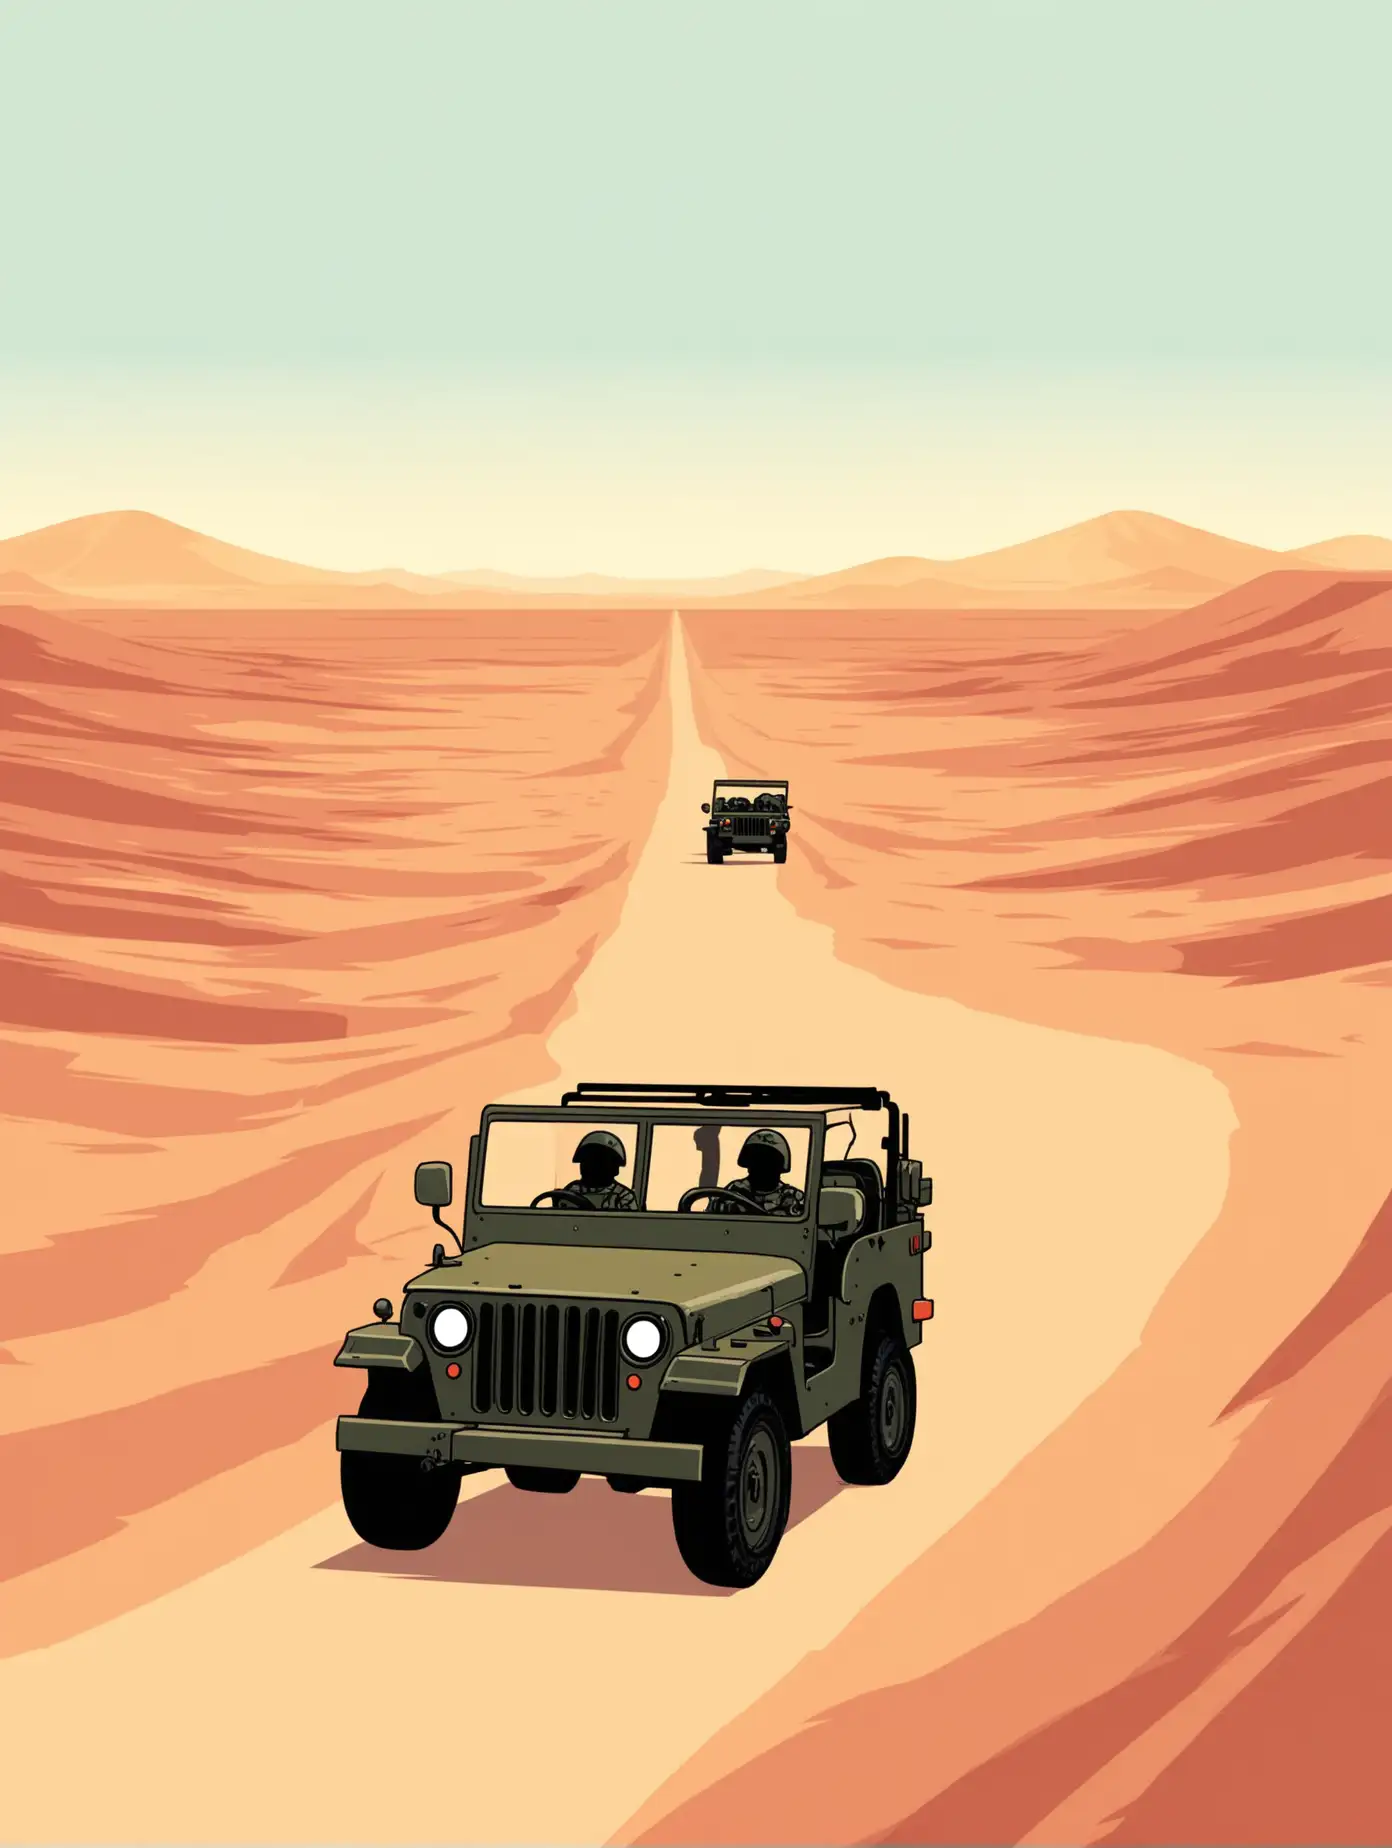 A minimalistic vector illustration of a small military jeep driving, in the distance, in a 4-color desert